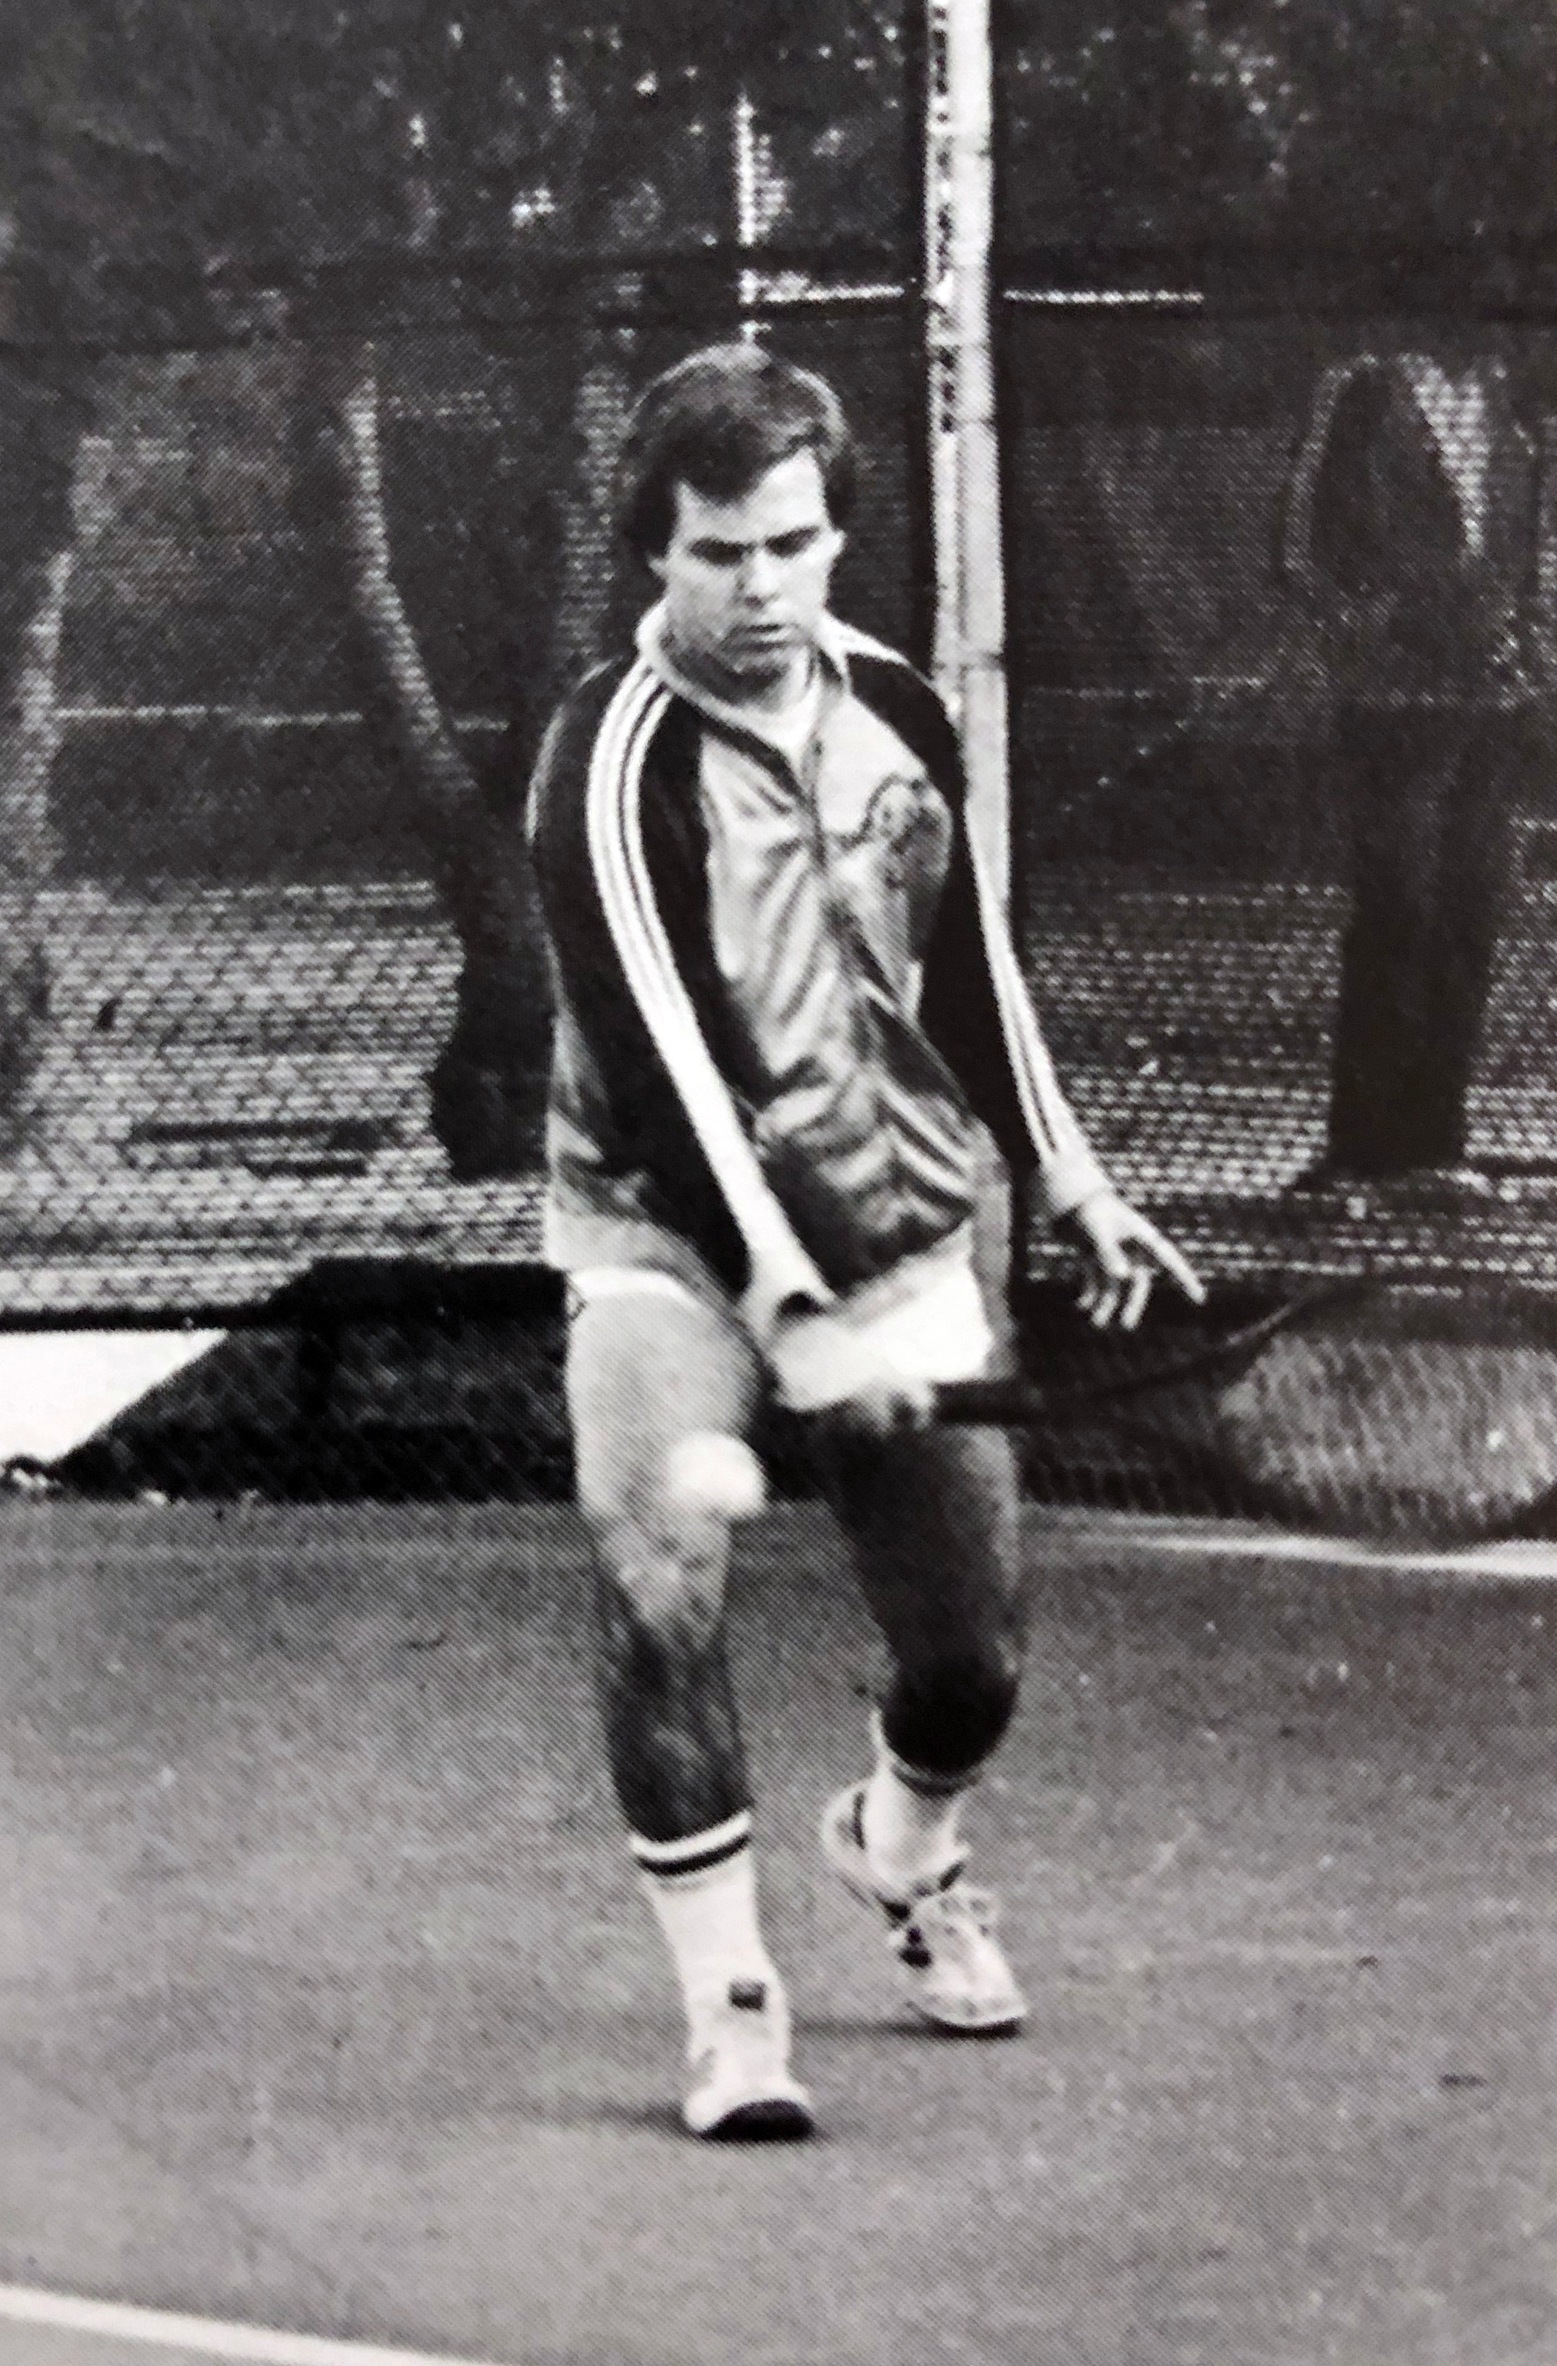 Donovan Jones with a backhand swing during his playing days at CMS (1981-84)